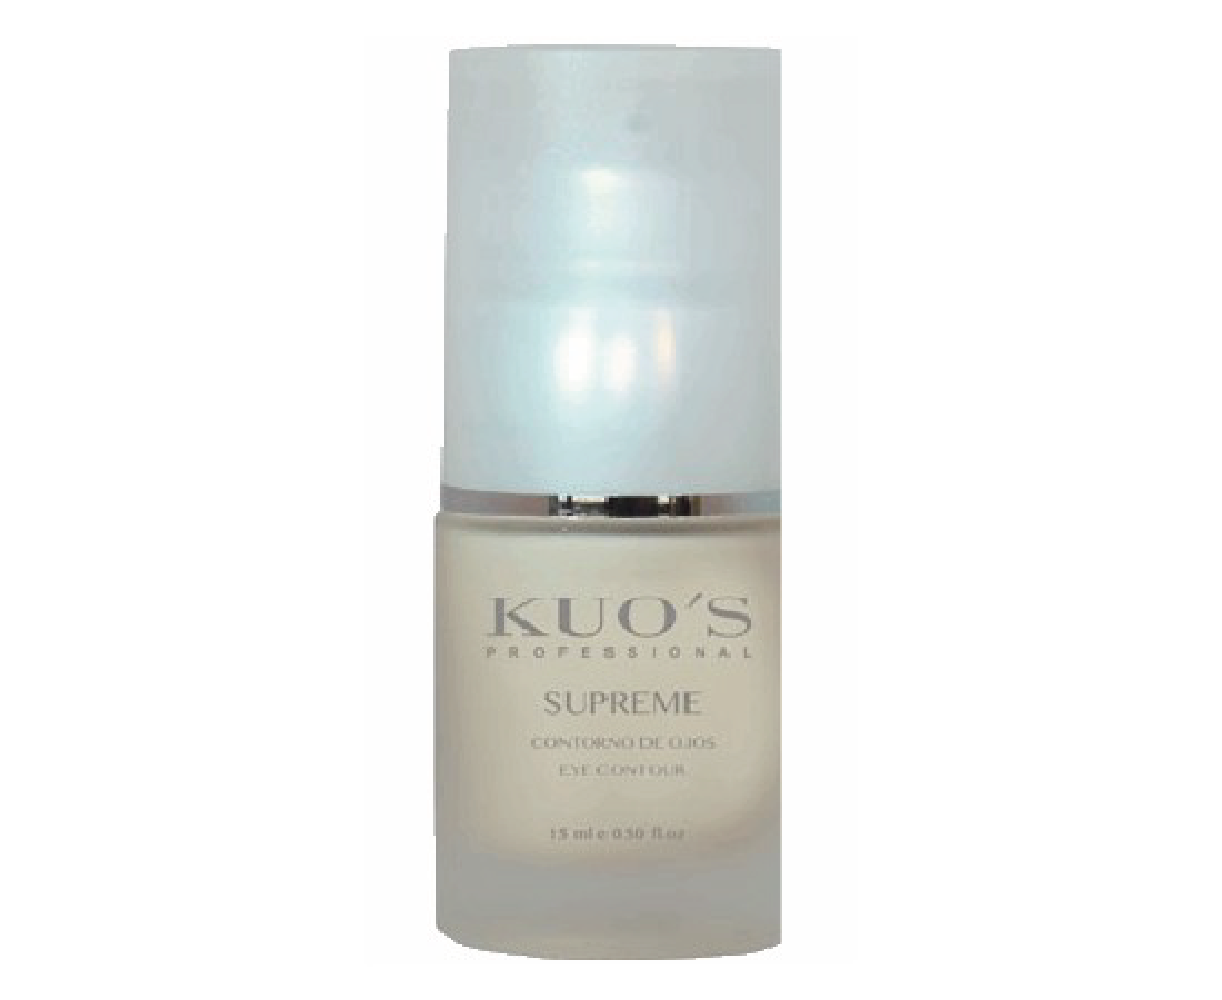 KUO'S supreme serum for eyes